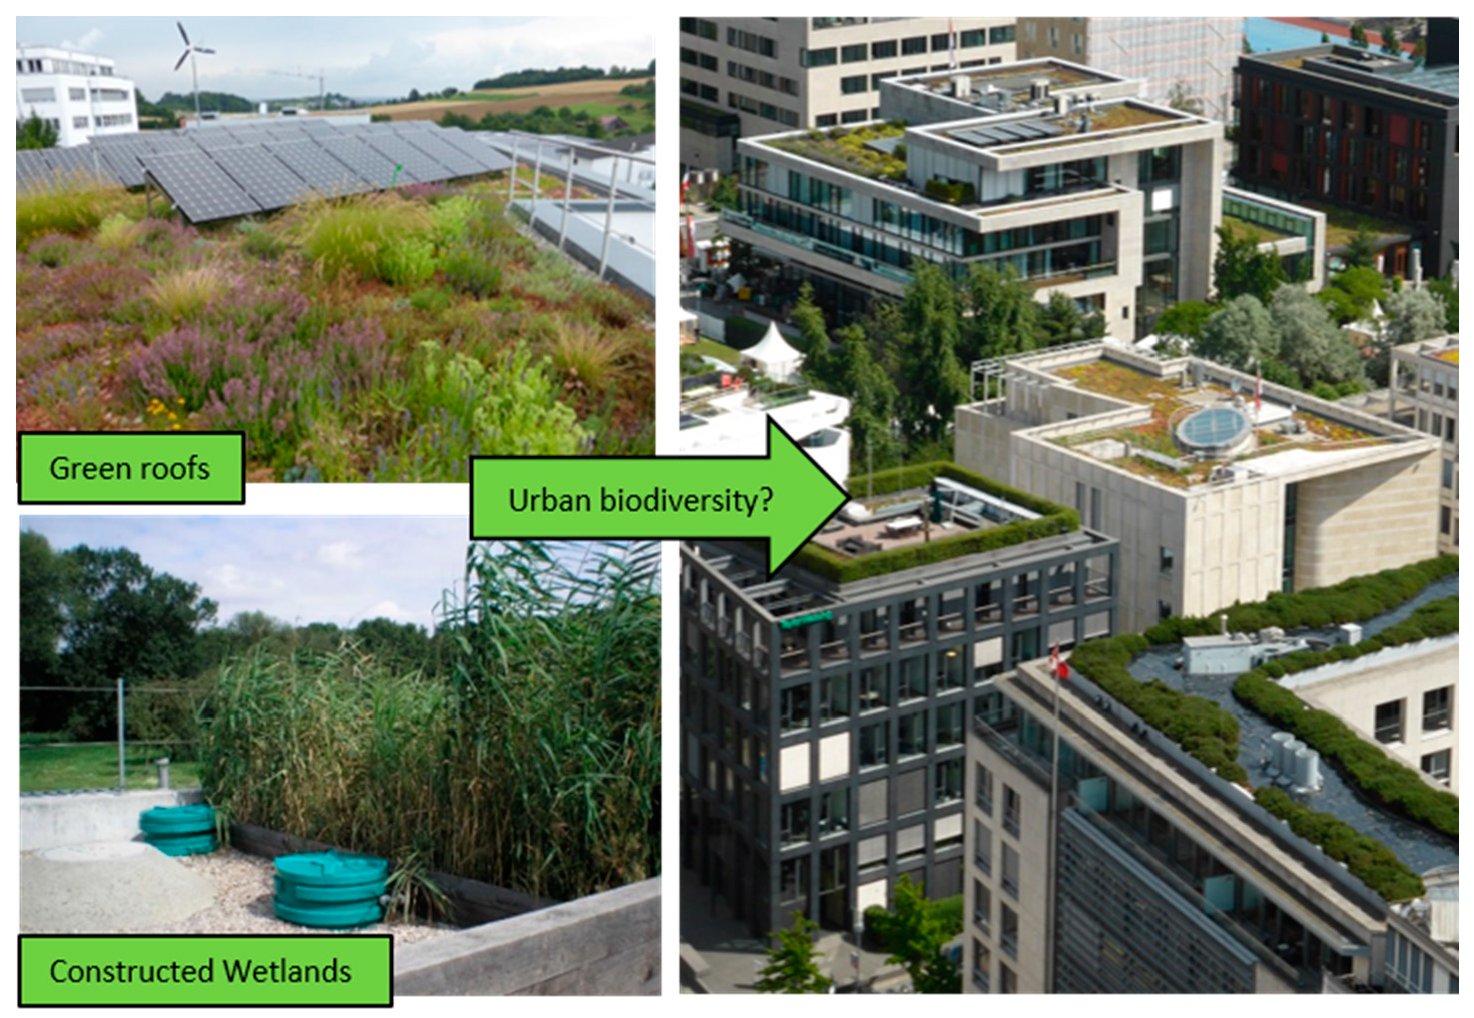 I. Introduction to Green Roofs for Erosion Control and Biodiversity